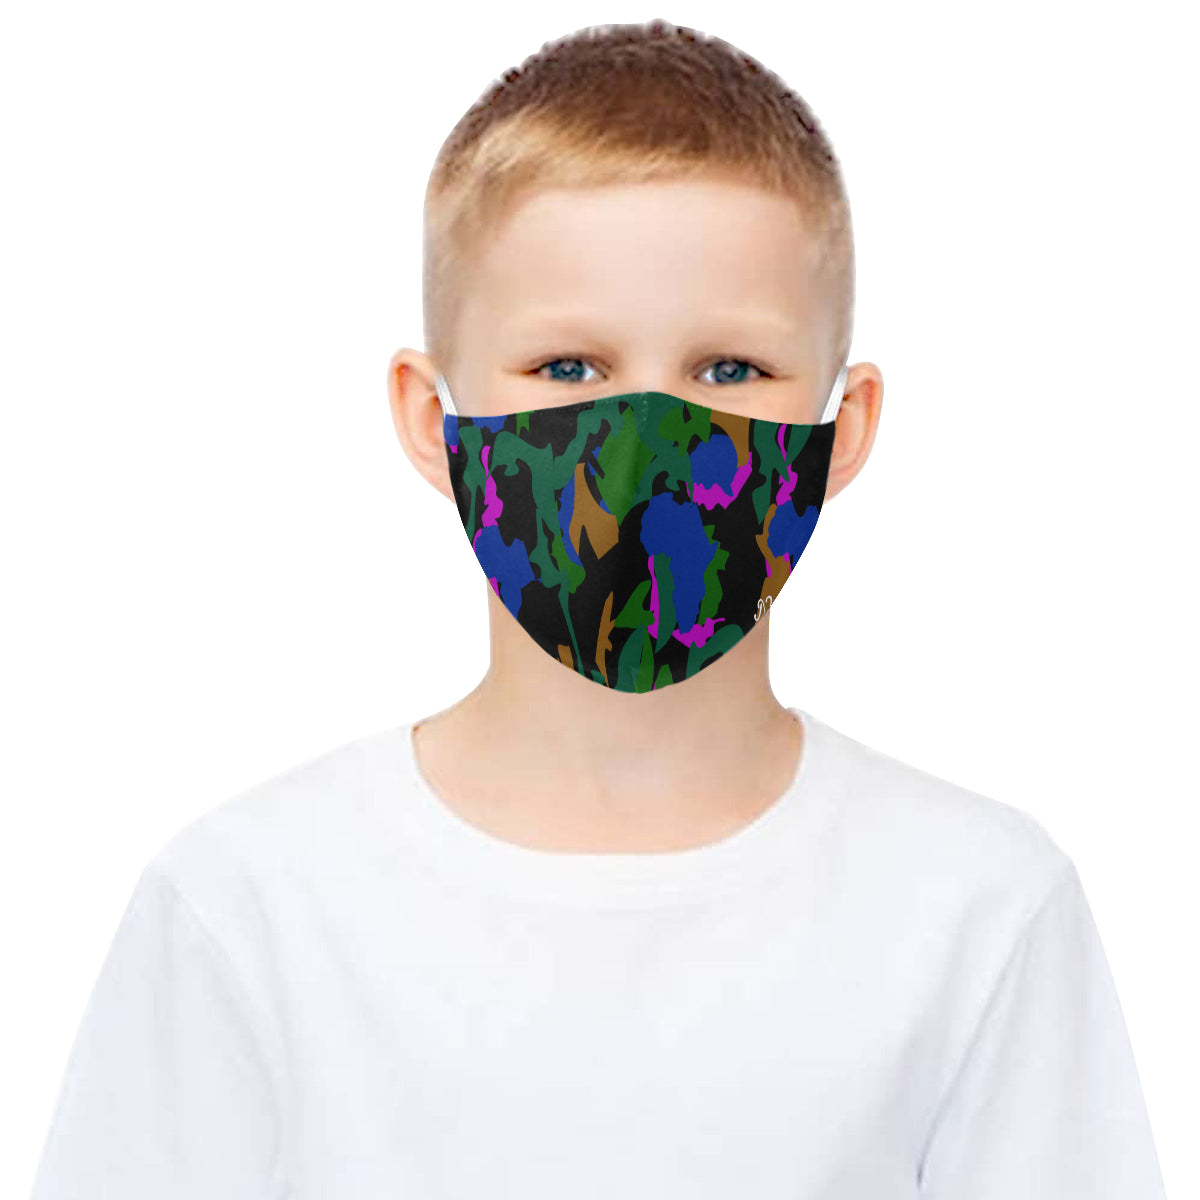 flyersetcinc Camo Print Cotton Fabric Face Mask with Filter Slot & Adjustable Strap - Non-medical use (2 Filters Included)